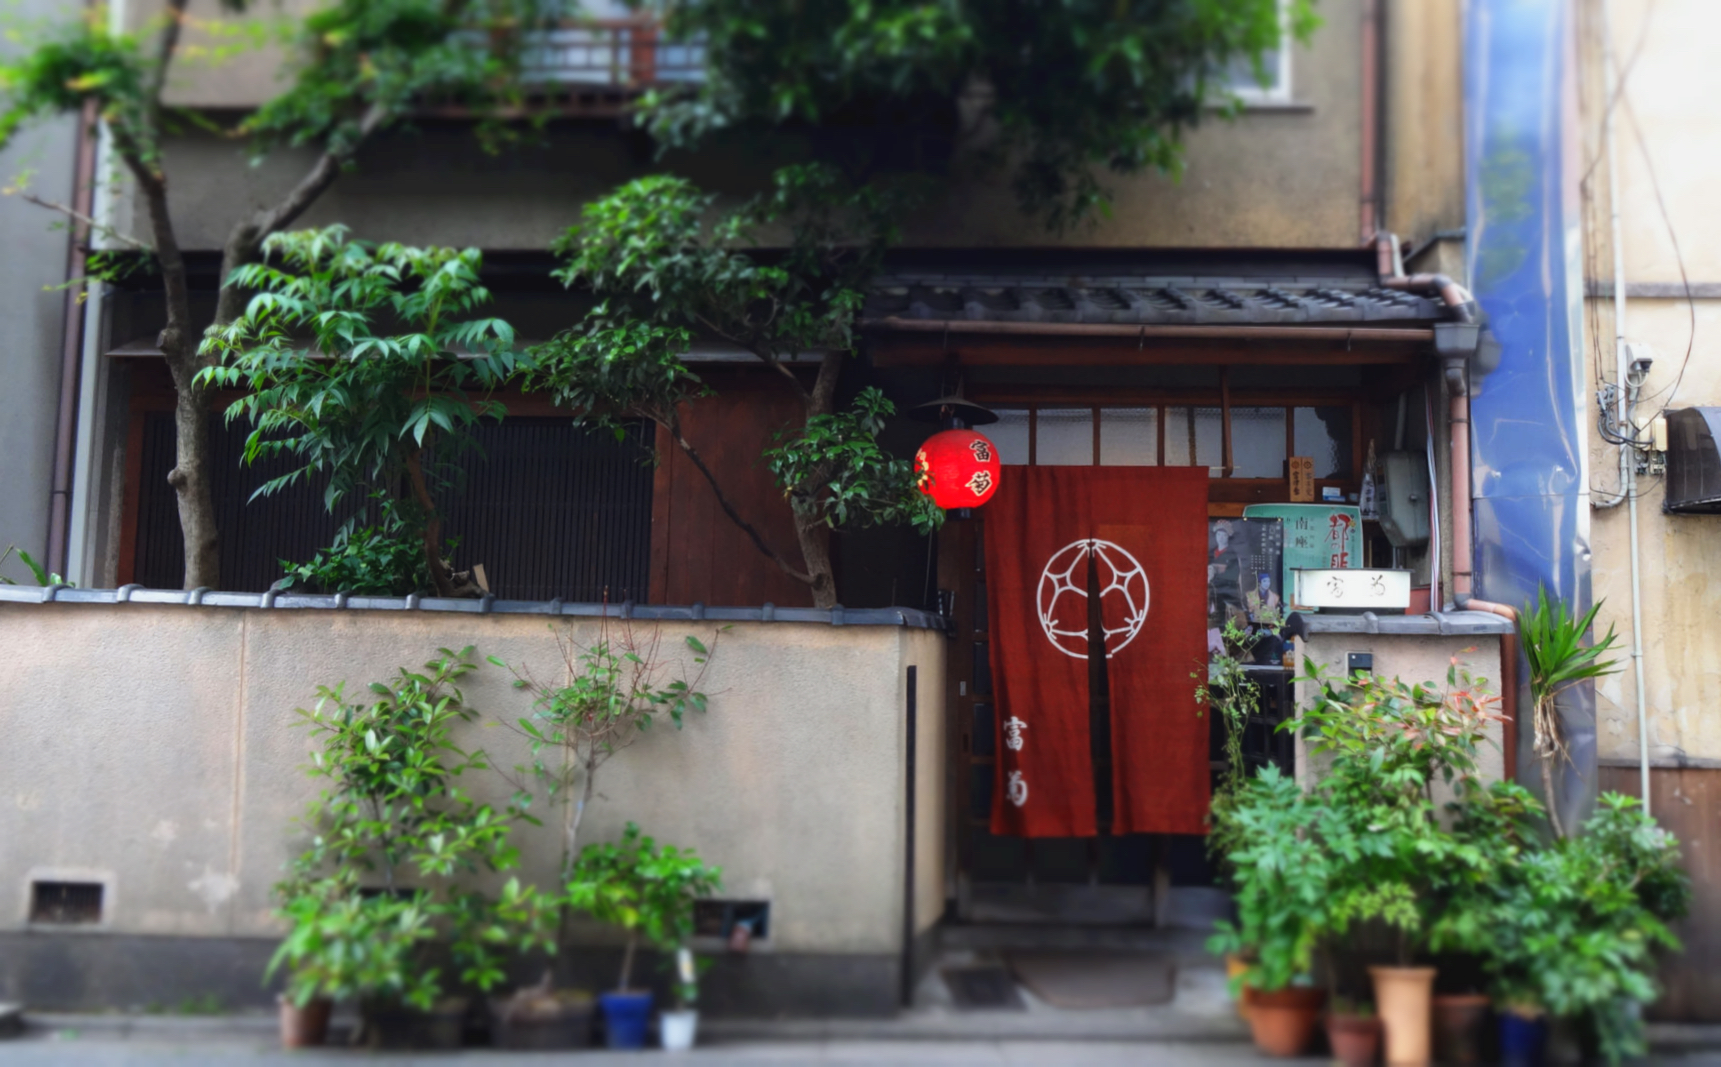 Traditional style architecture around Kyoto